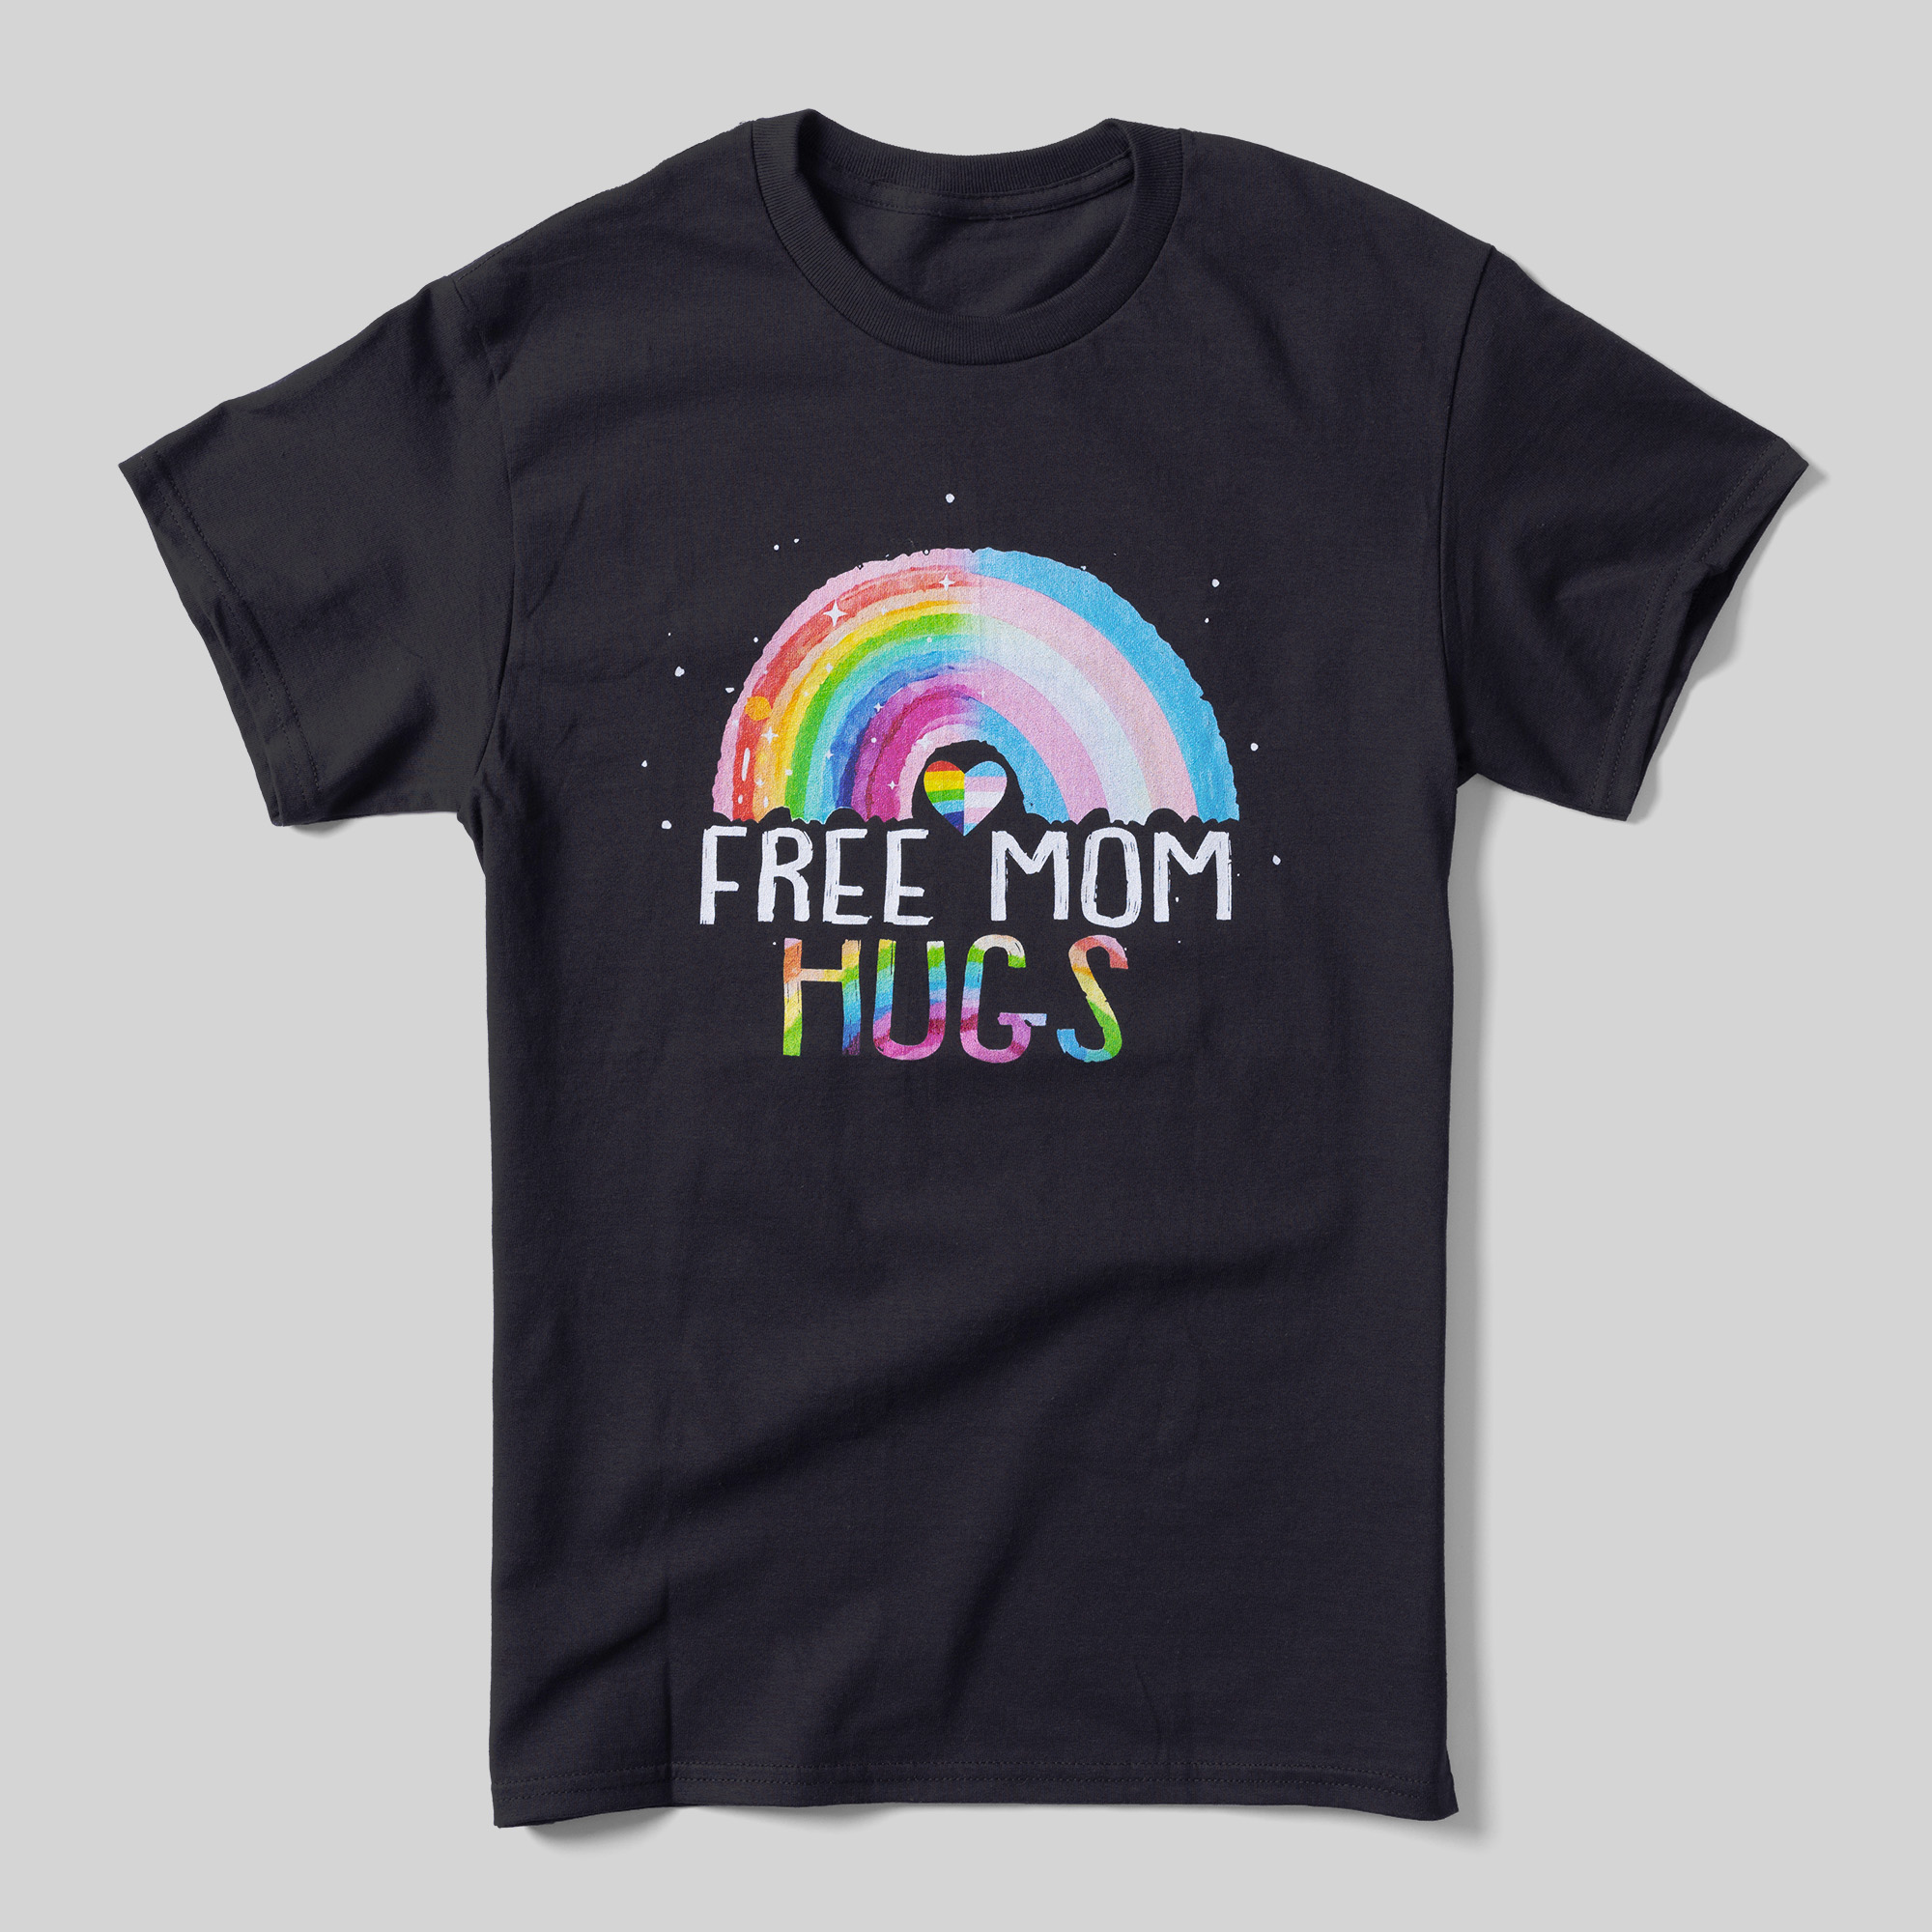 A black t-shirt that reads "Free Mom Hugs" with a rainbow above it in the style of a child's drawing. Half of the rainbow contains the Pride Flag colors, and the other half contains the Trans Pride Flag colors.